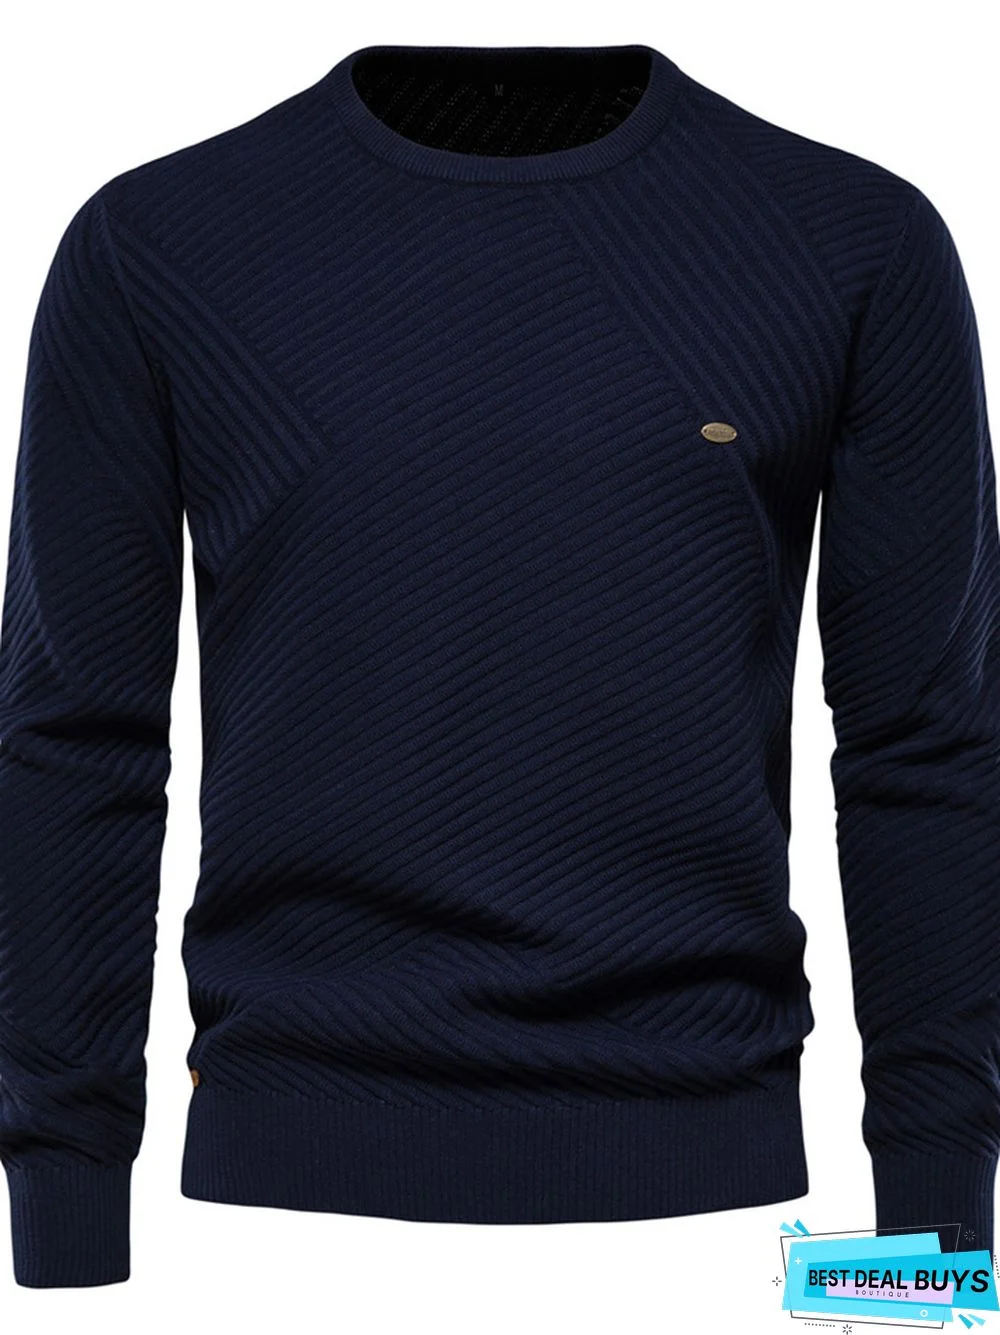 Men's Crewneck Solid Color Pullover Knit Sweater